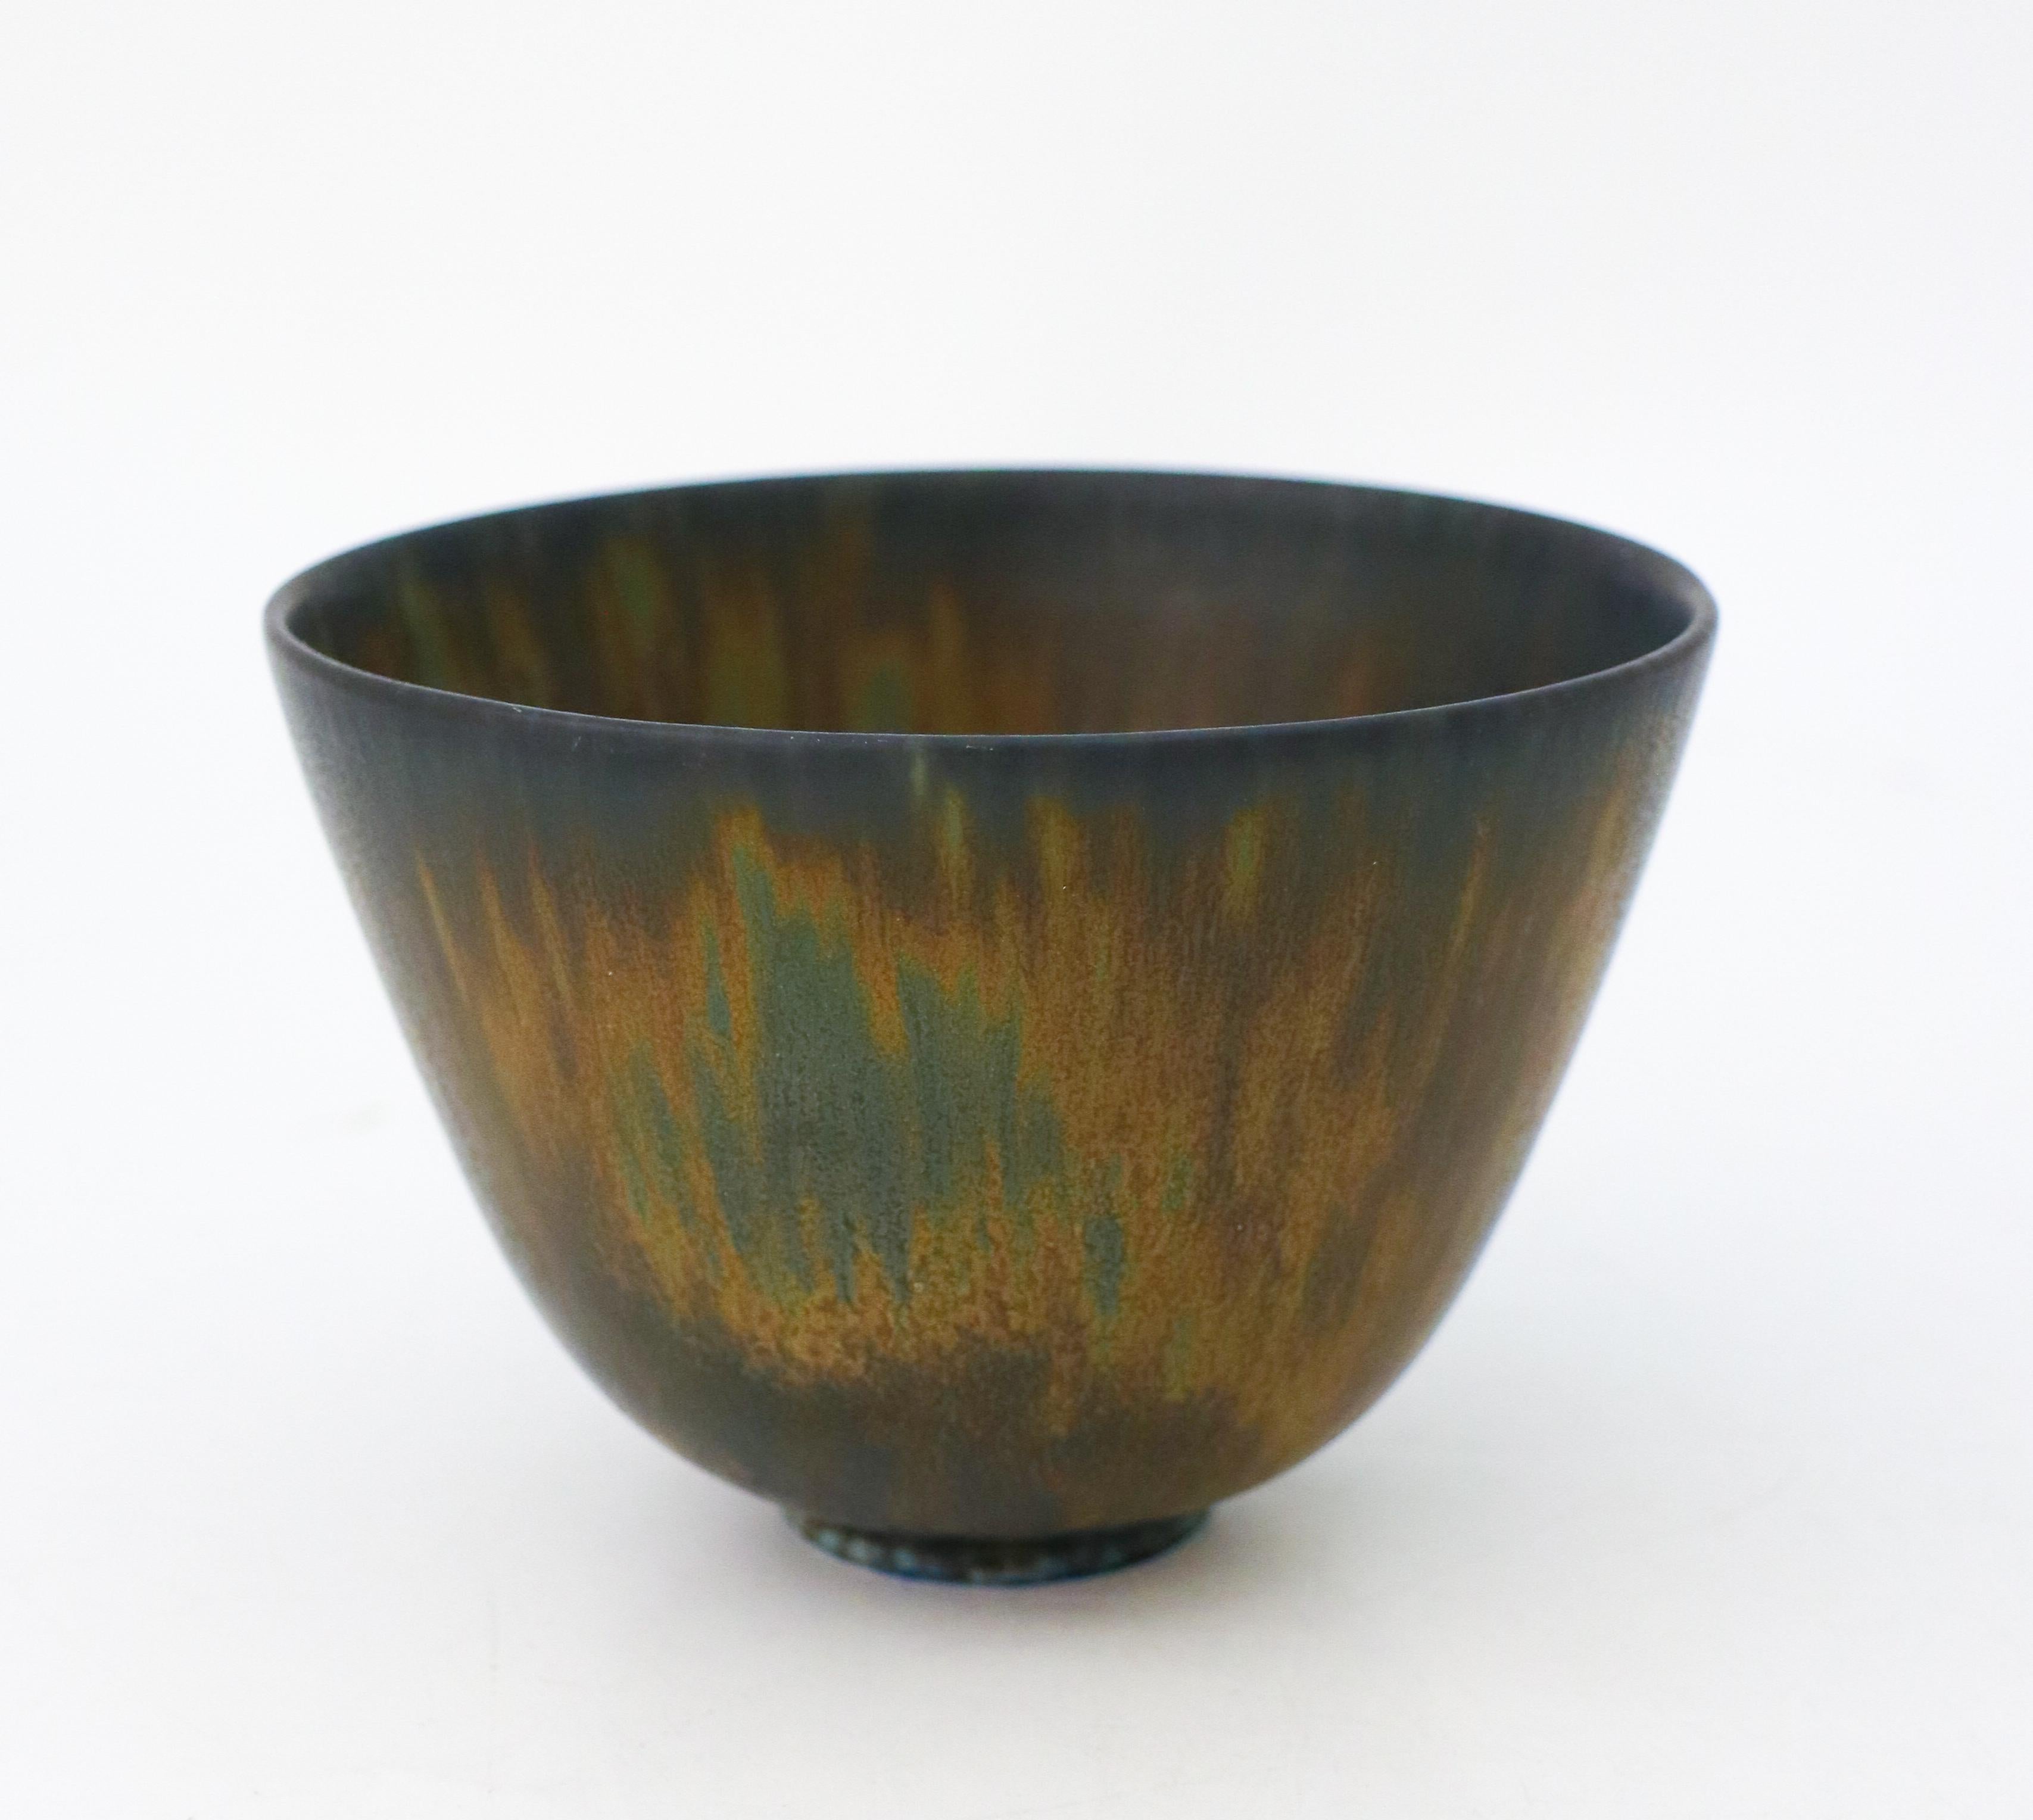 A green and brown bowl designed by Gunnar Nylund at Rörstrand, the bowl is 9 cm (3.6